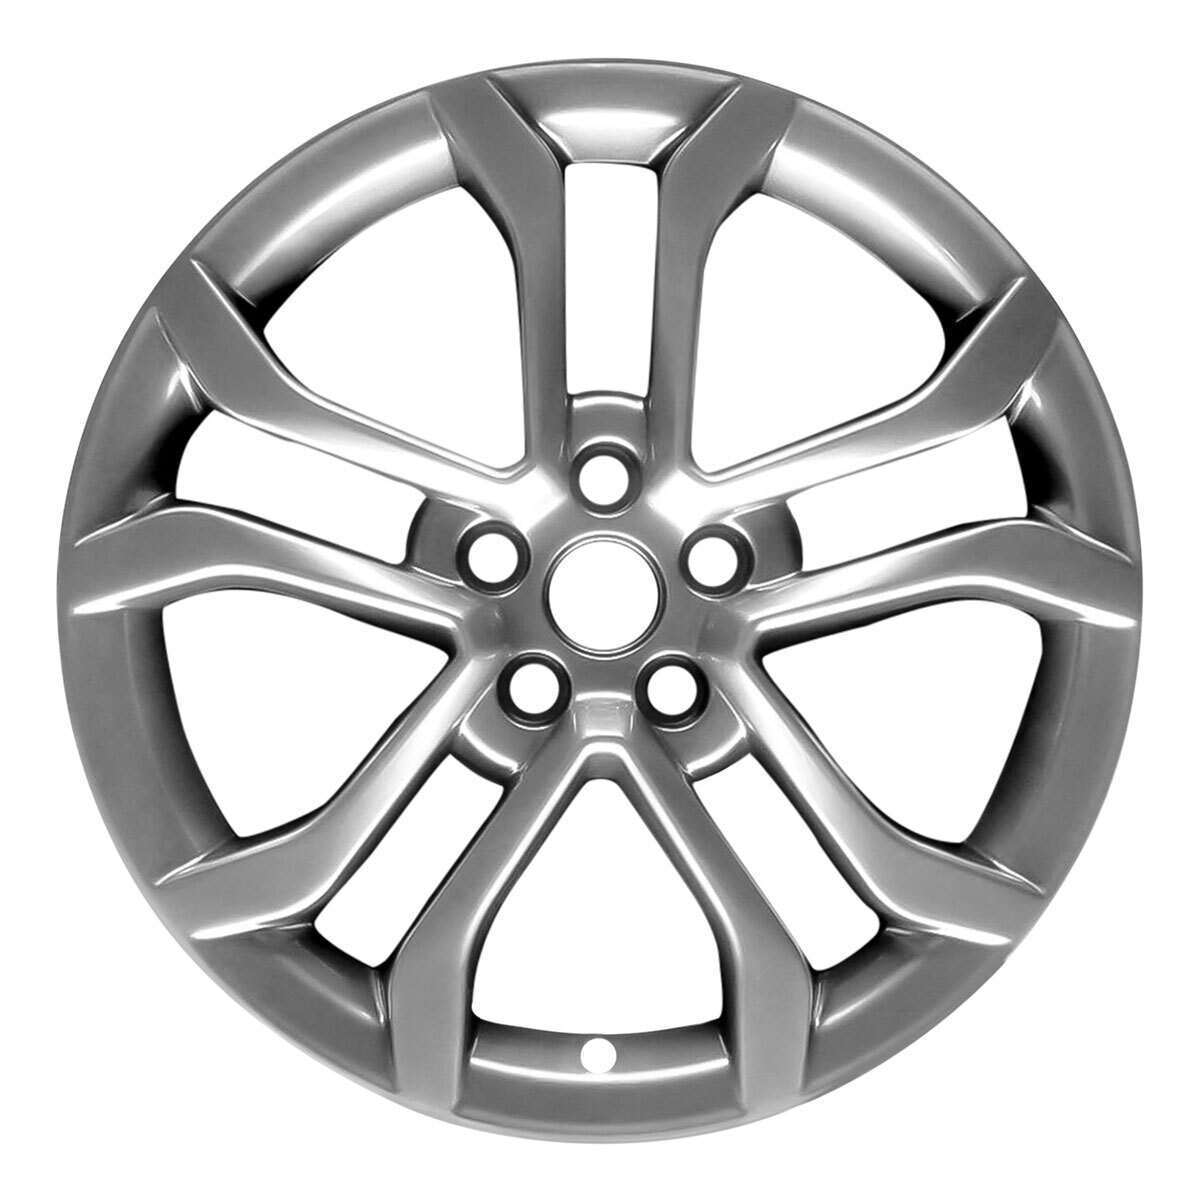 2020 Ford Fusion New 18" Replacement Wheel Rim RW10120S